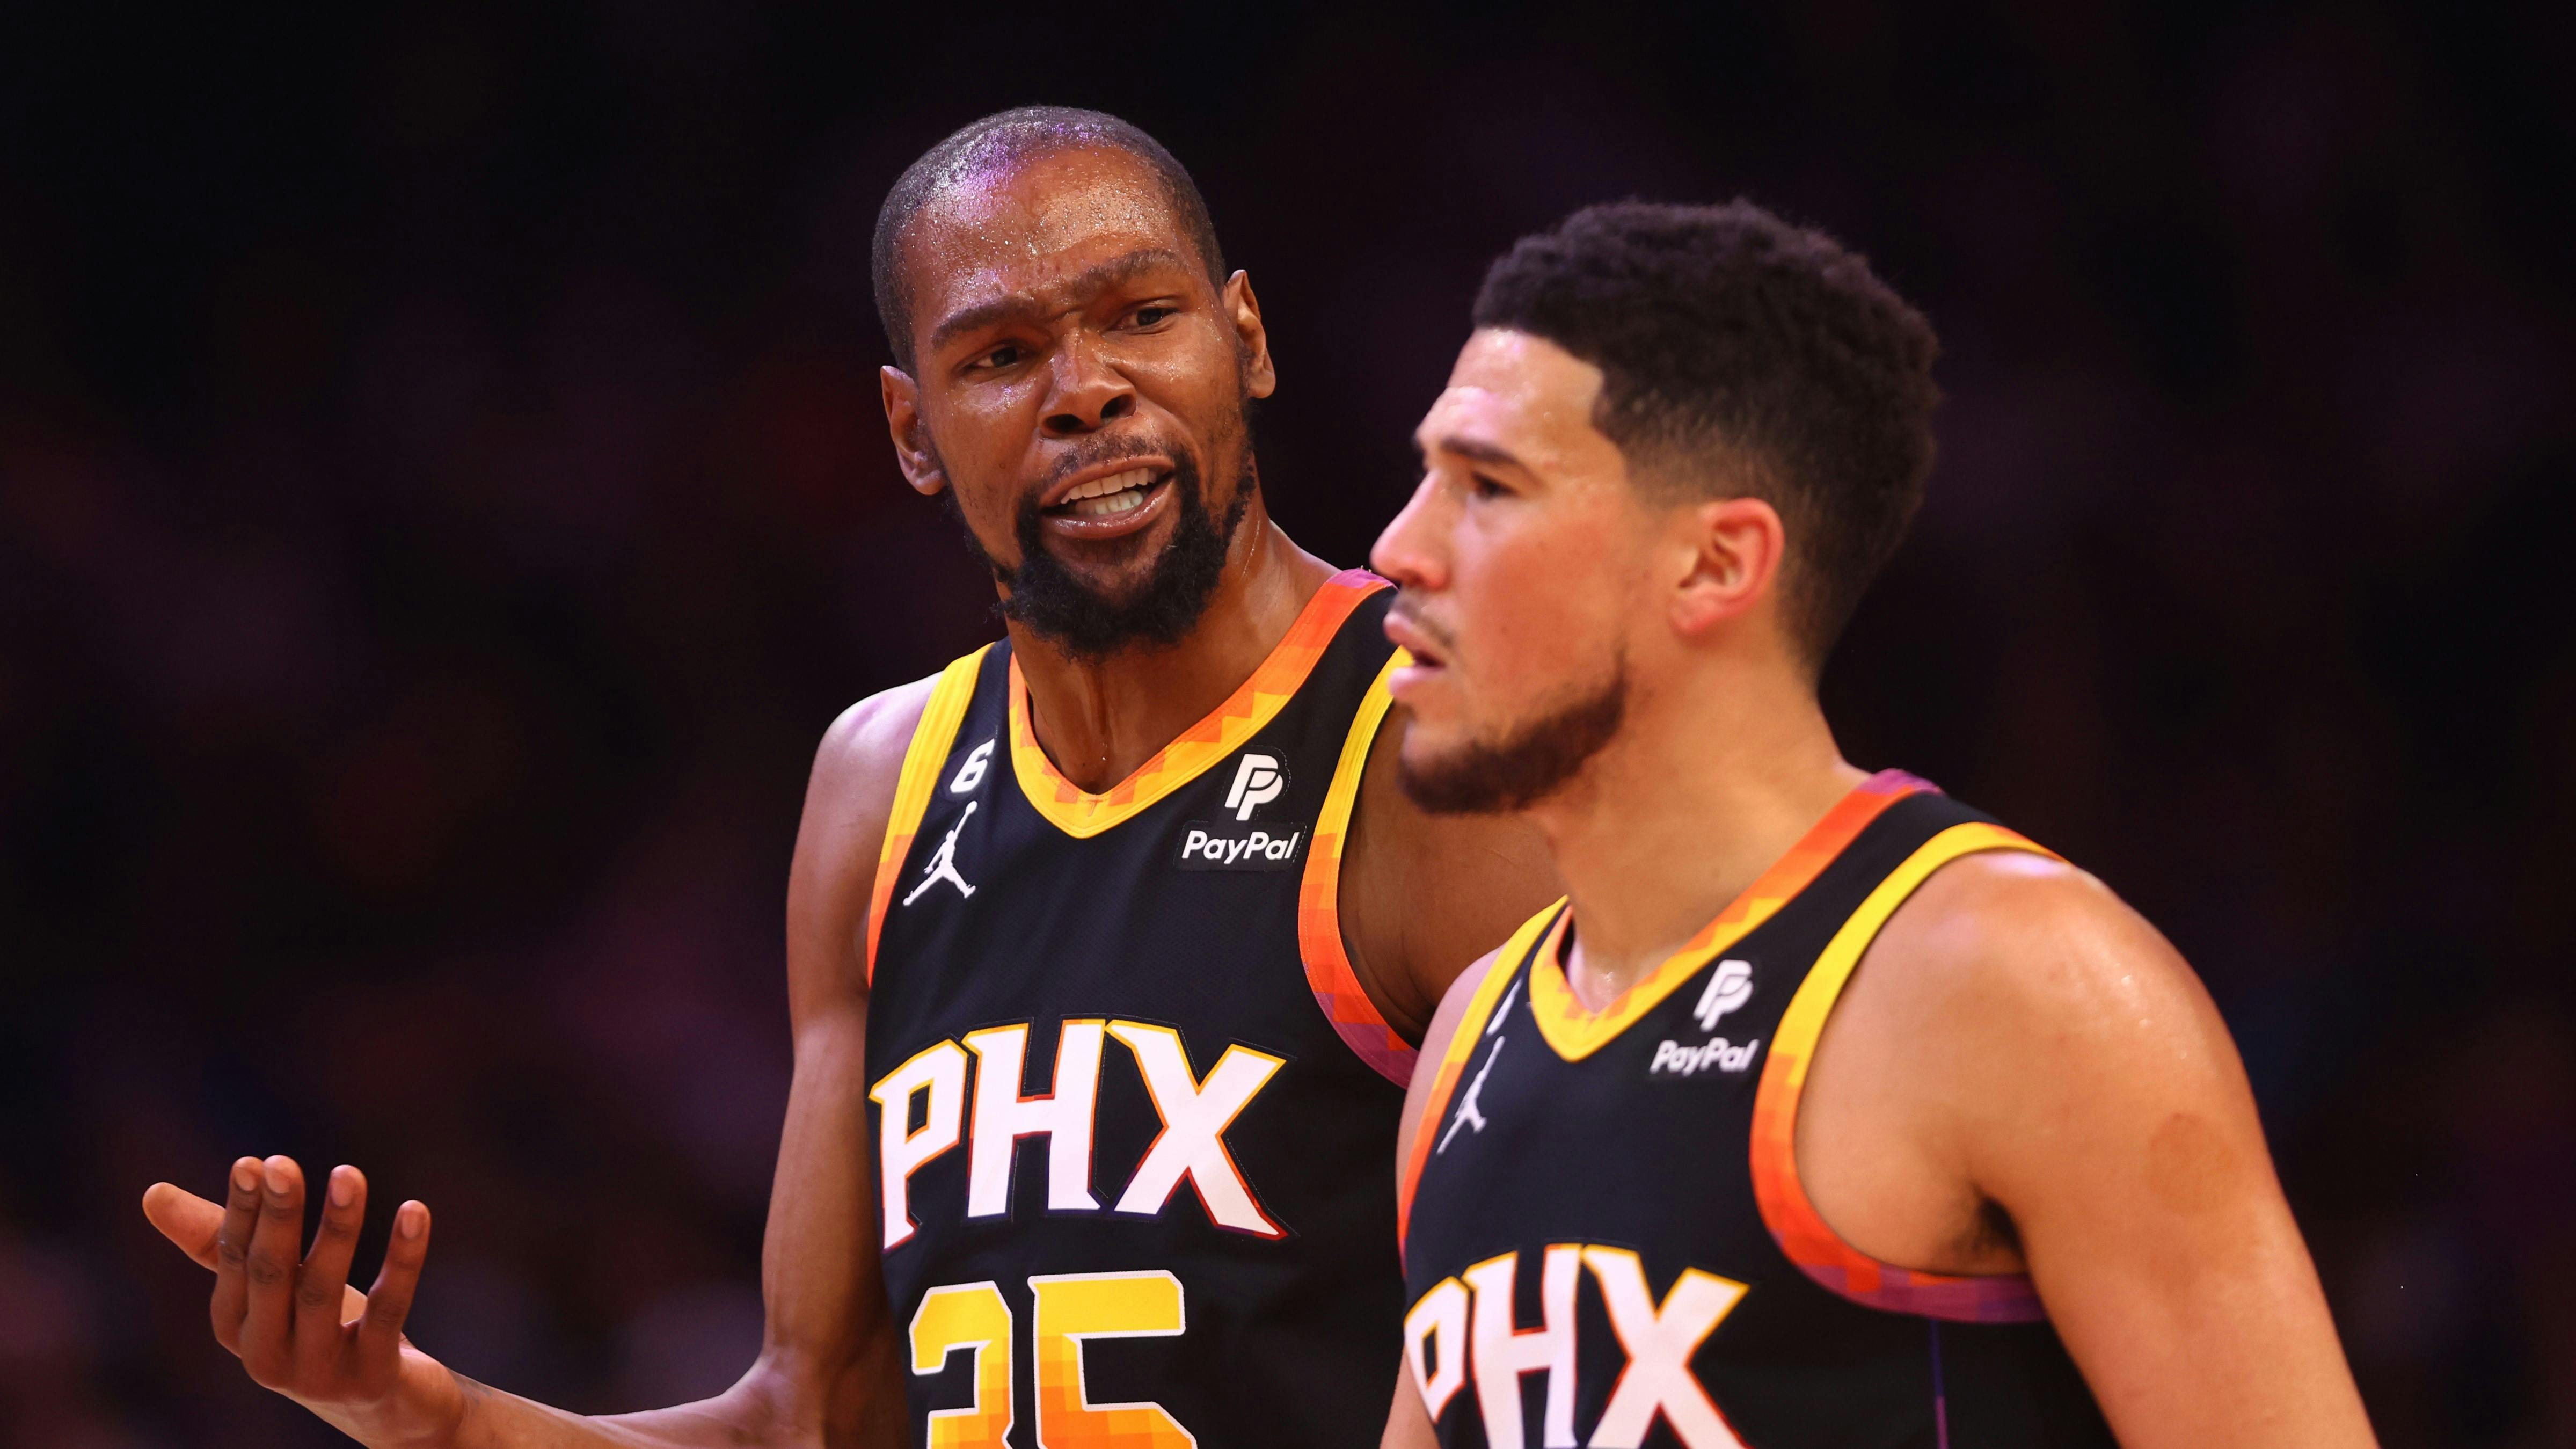 Phoenix Suns have continuity with returning bench players